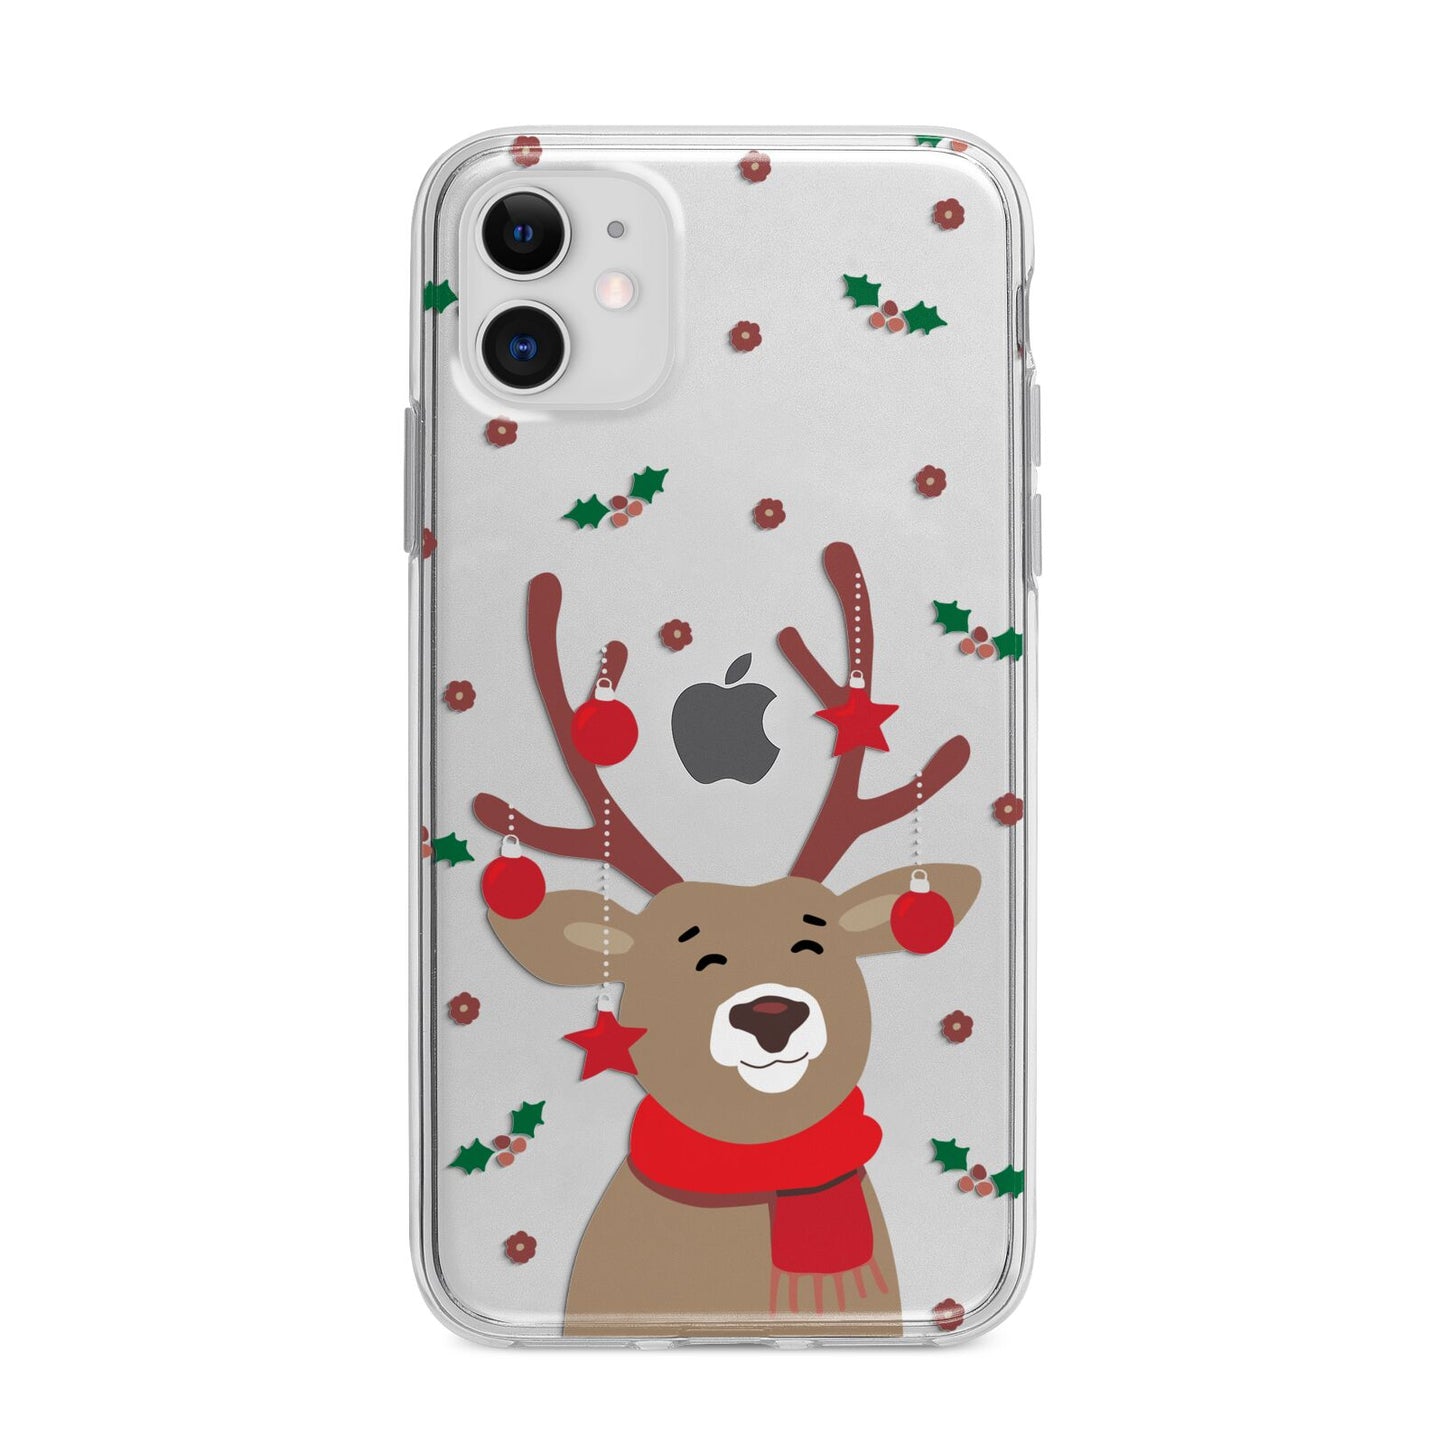 Reindeer Christmas Apple iPhone 11 in White with Bumper Case